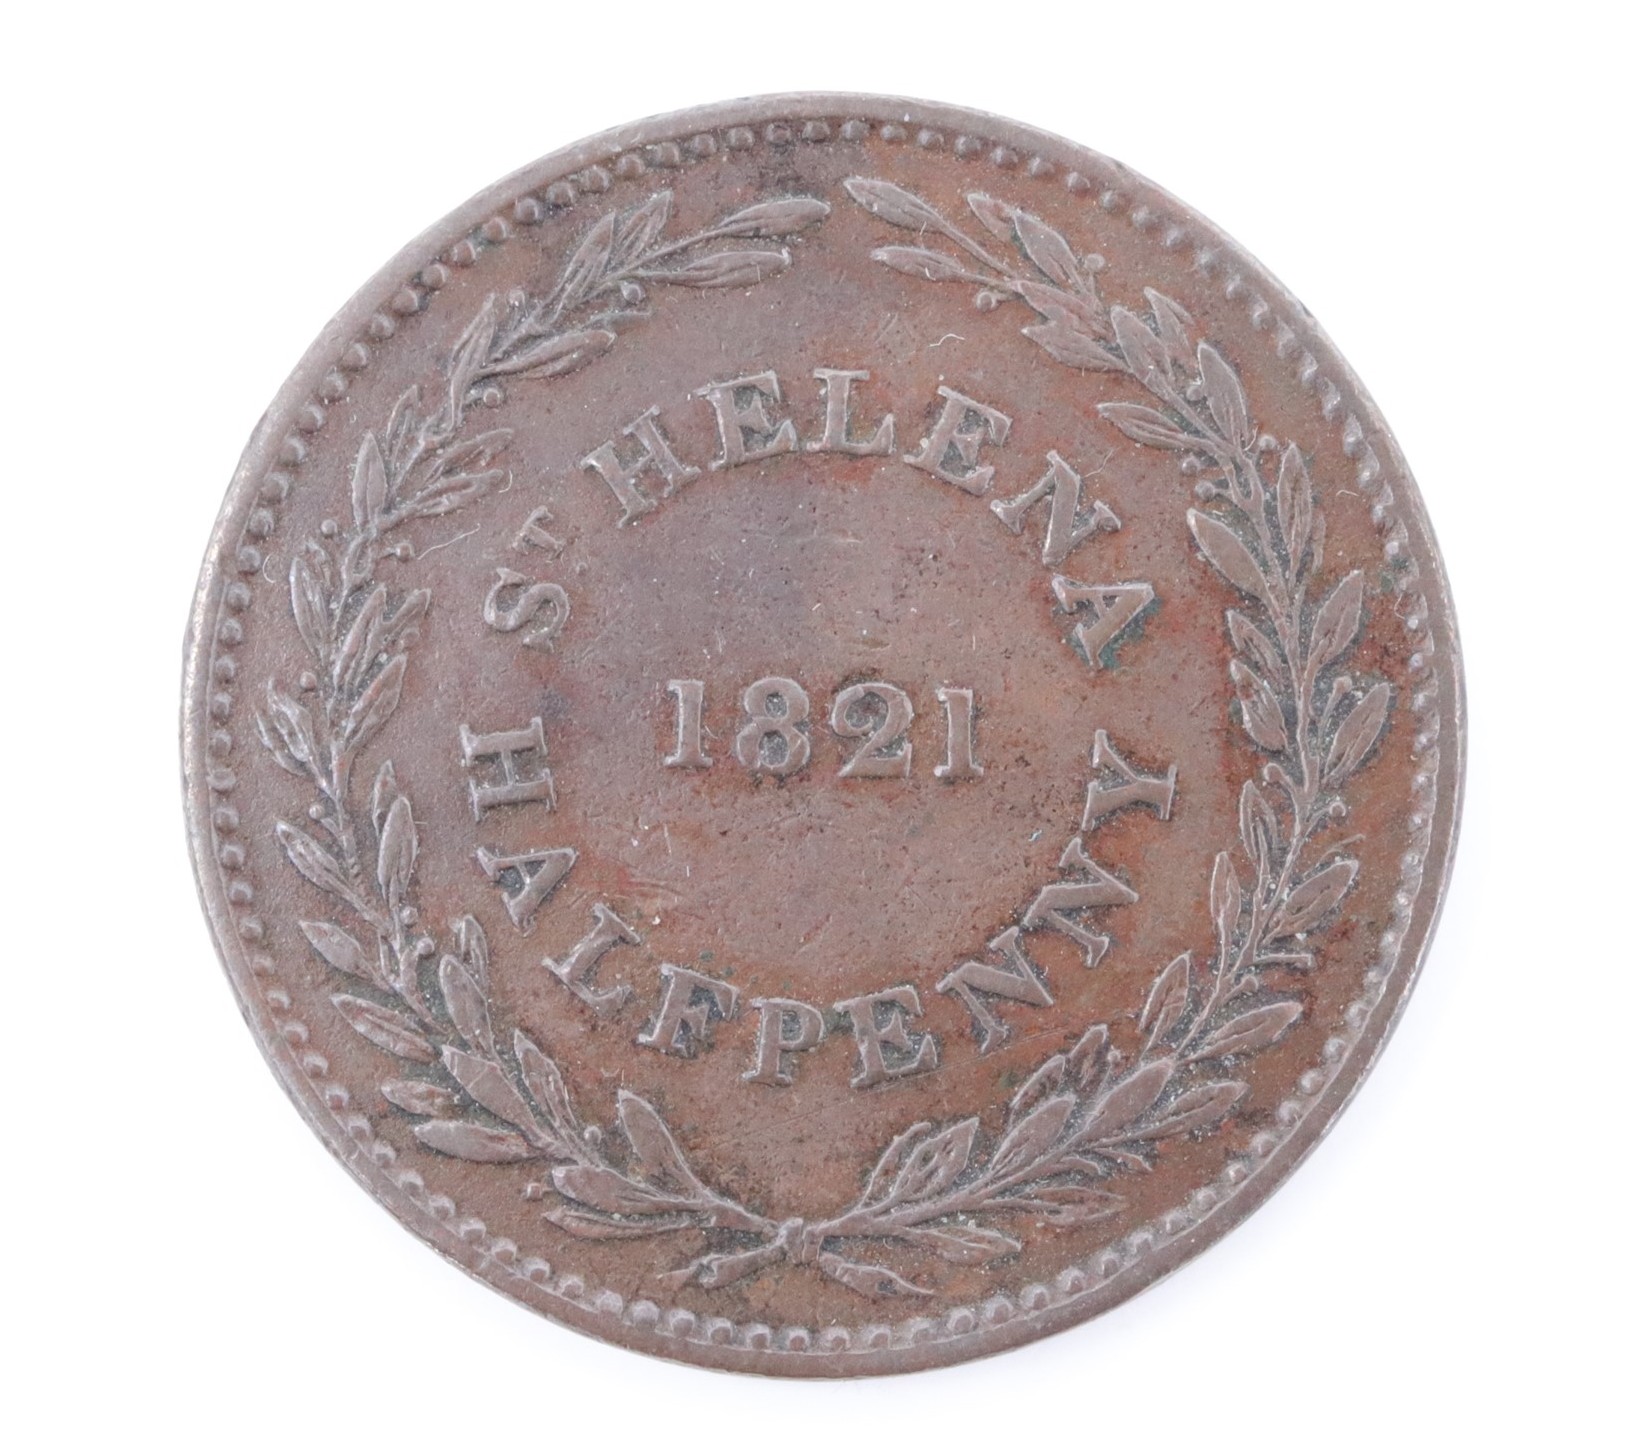 An 1821 St Helena copper half penny coin - Image 2 of 2